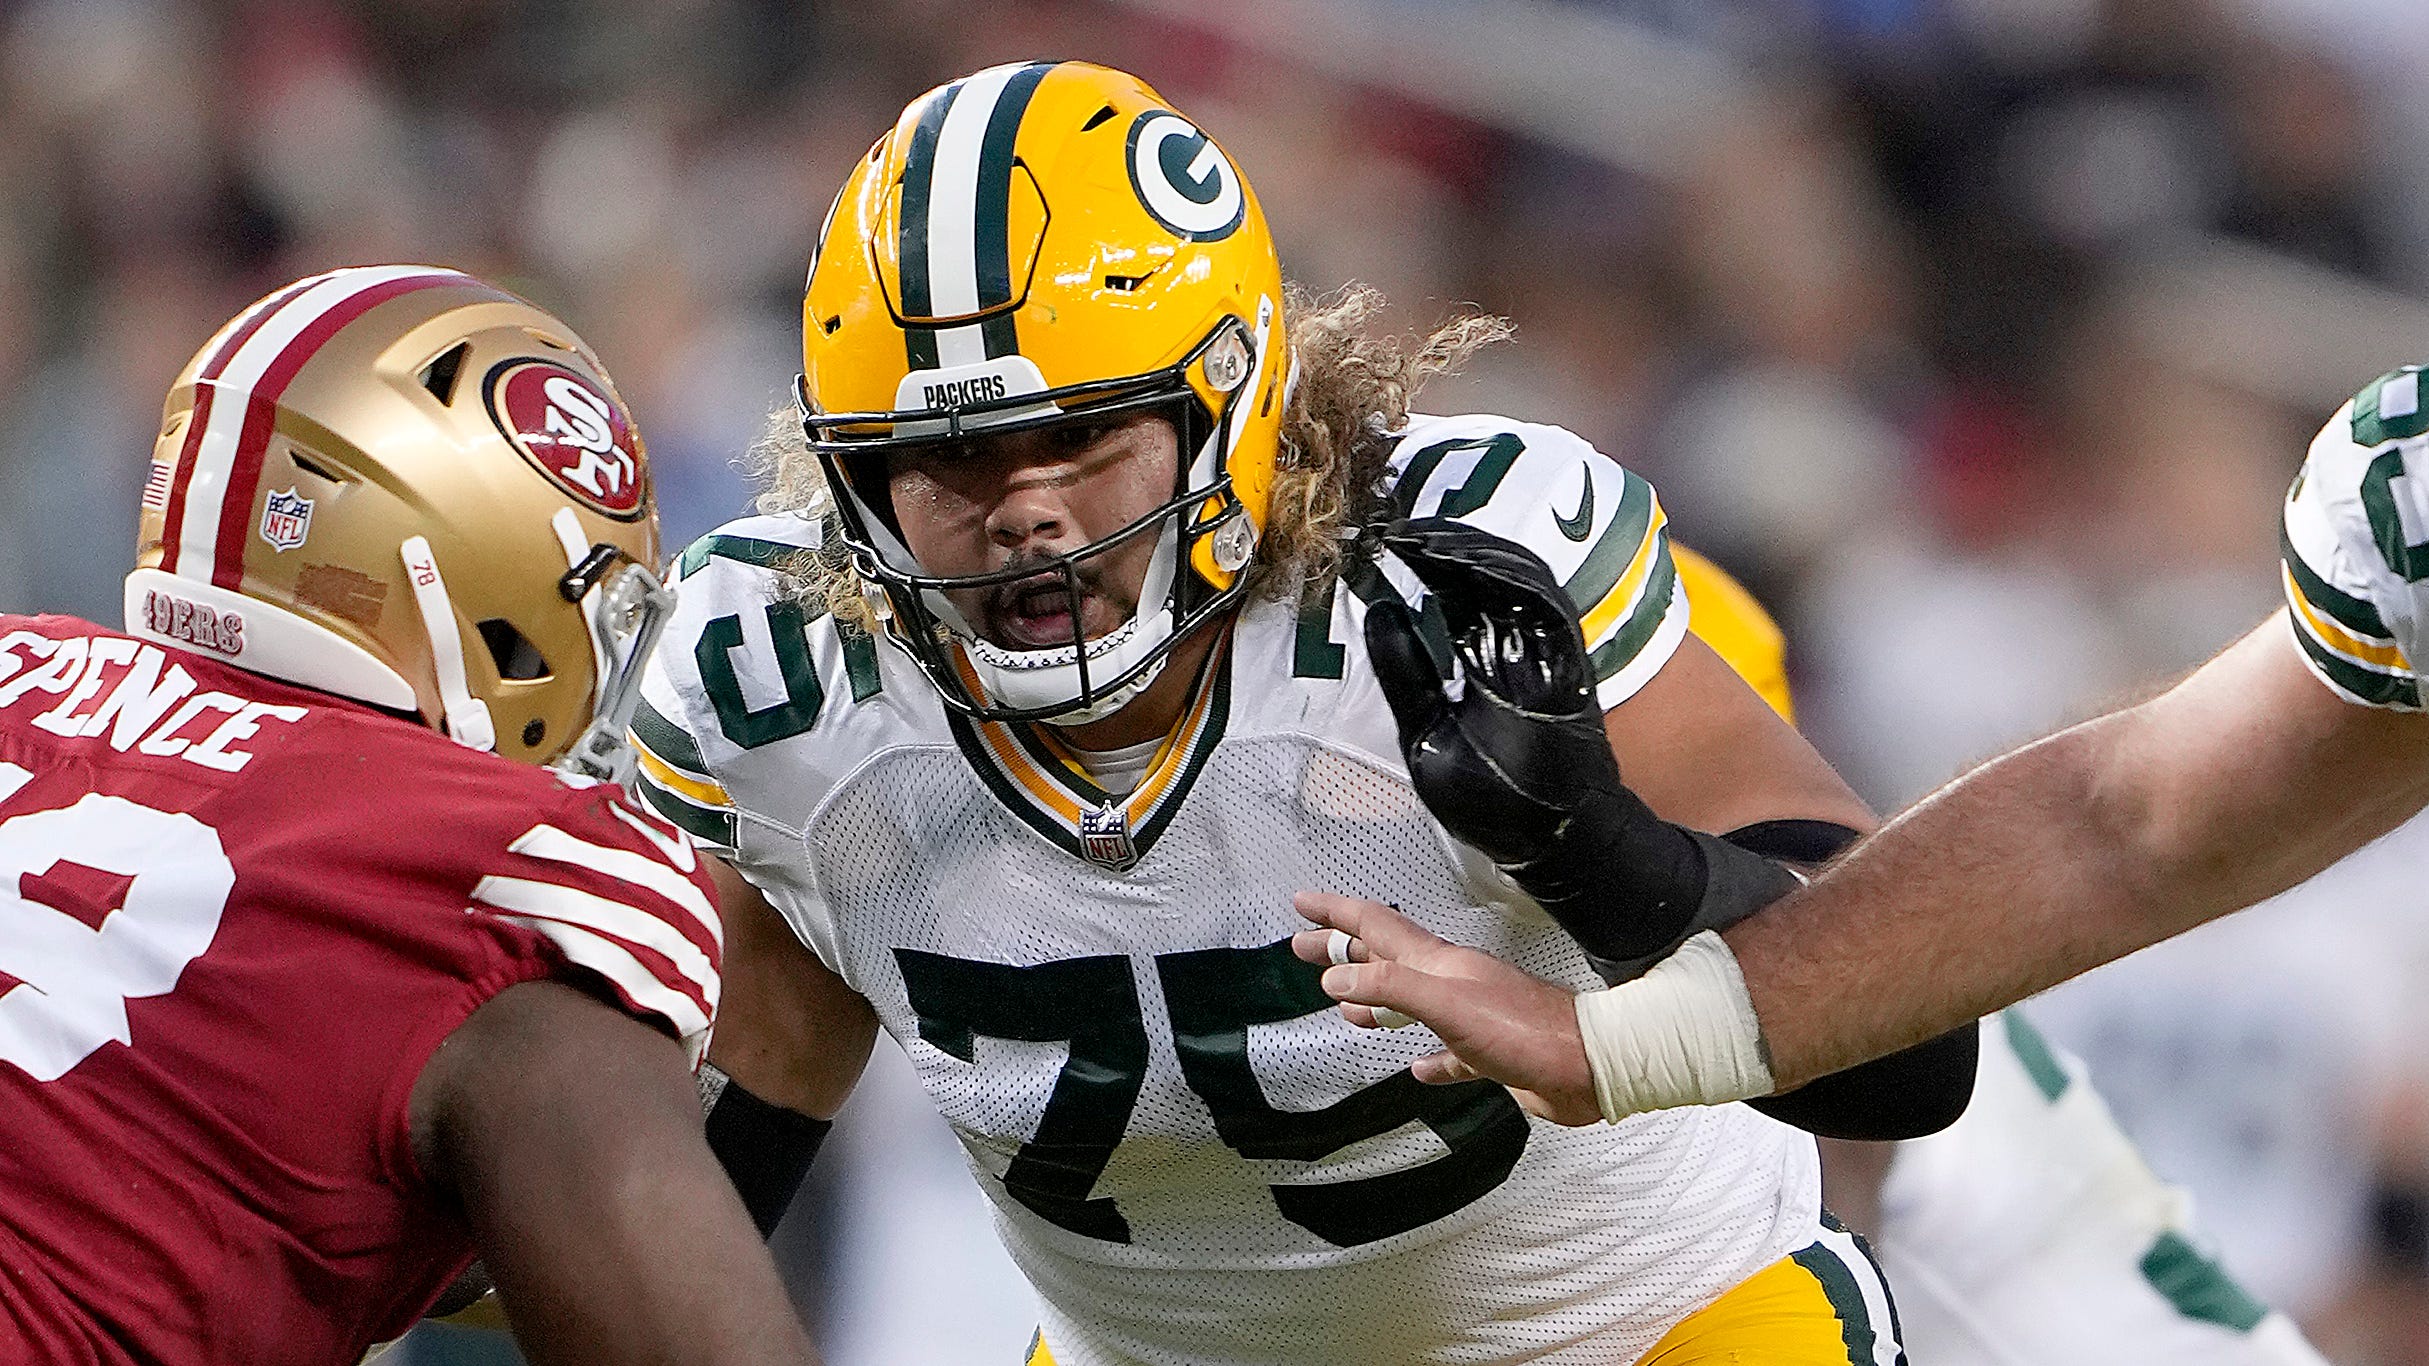  The Packers' next playoff game is against No. 1 San Francisco 49ers on Saturday night 